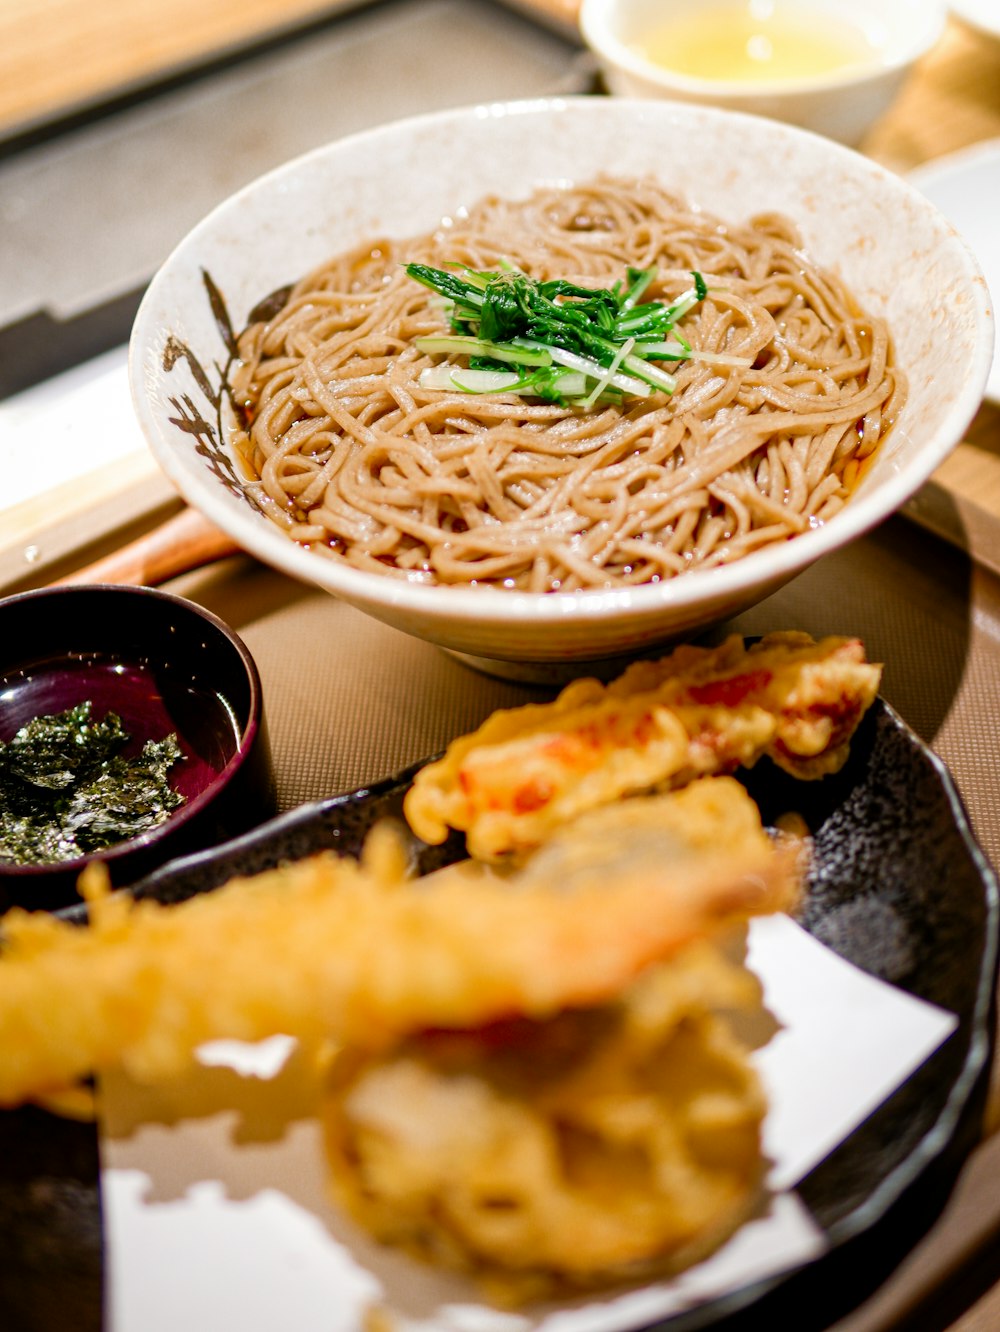 a bowl of noodles and other foods on a tray